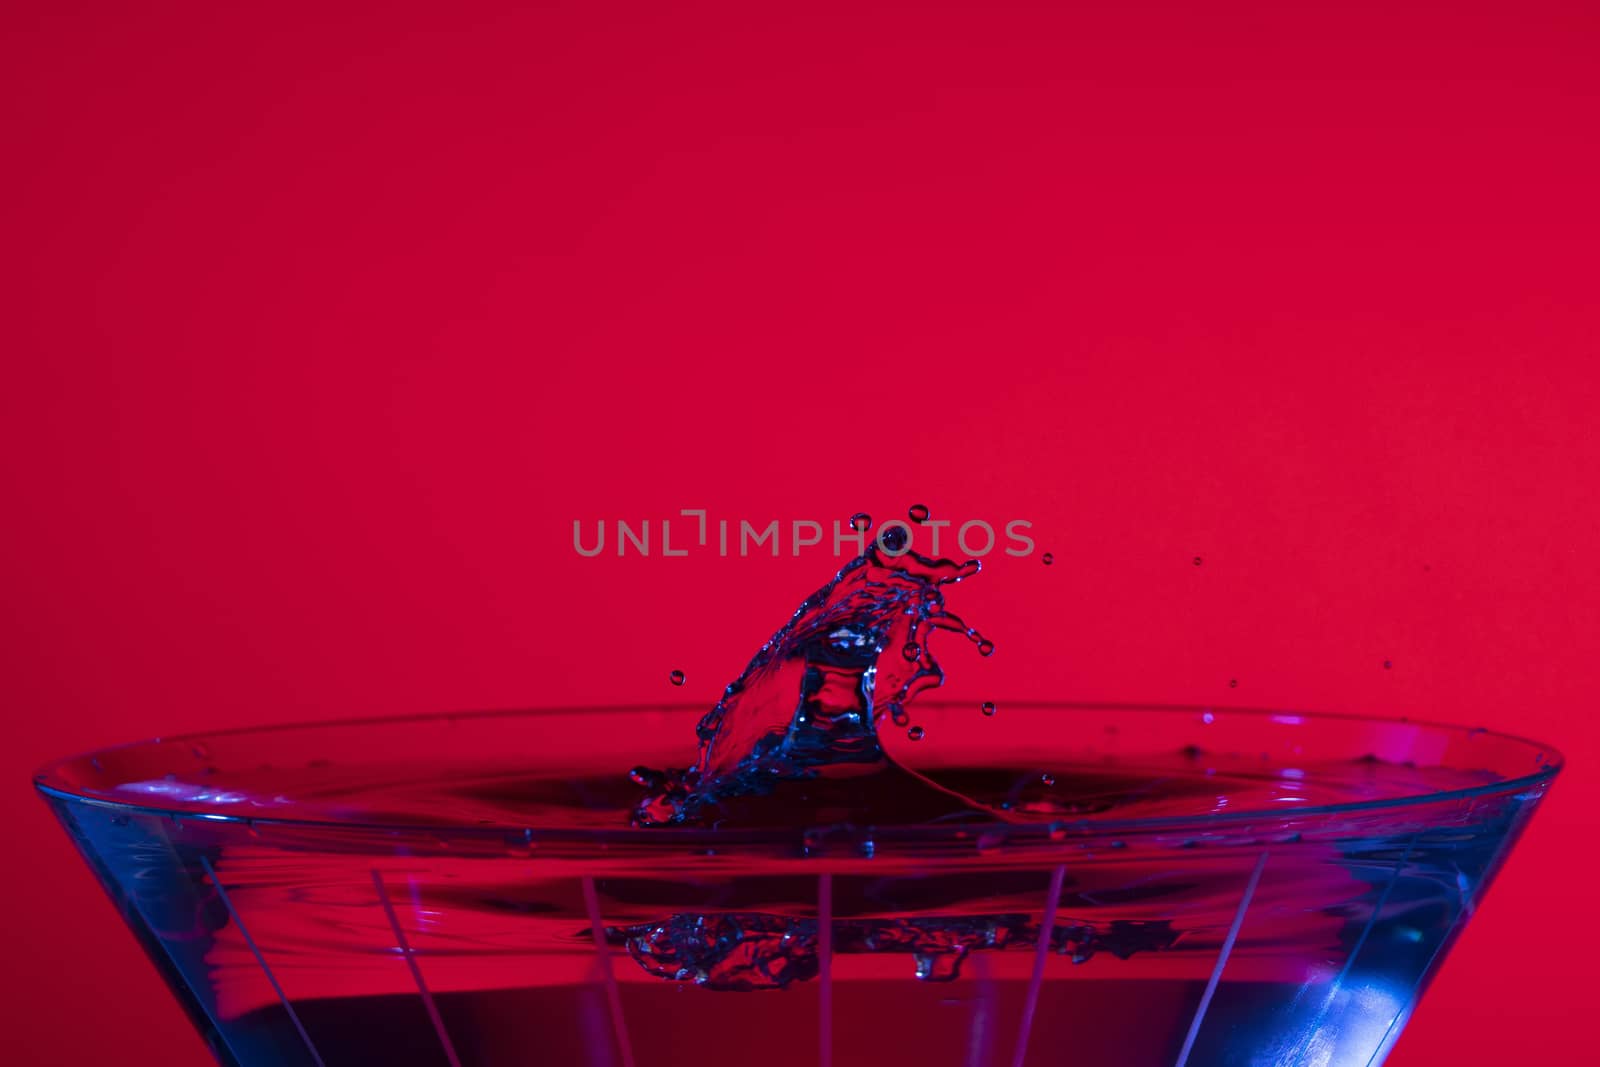 Droplets collide over a martini glass with red background and blue liquid highlights.